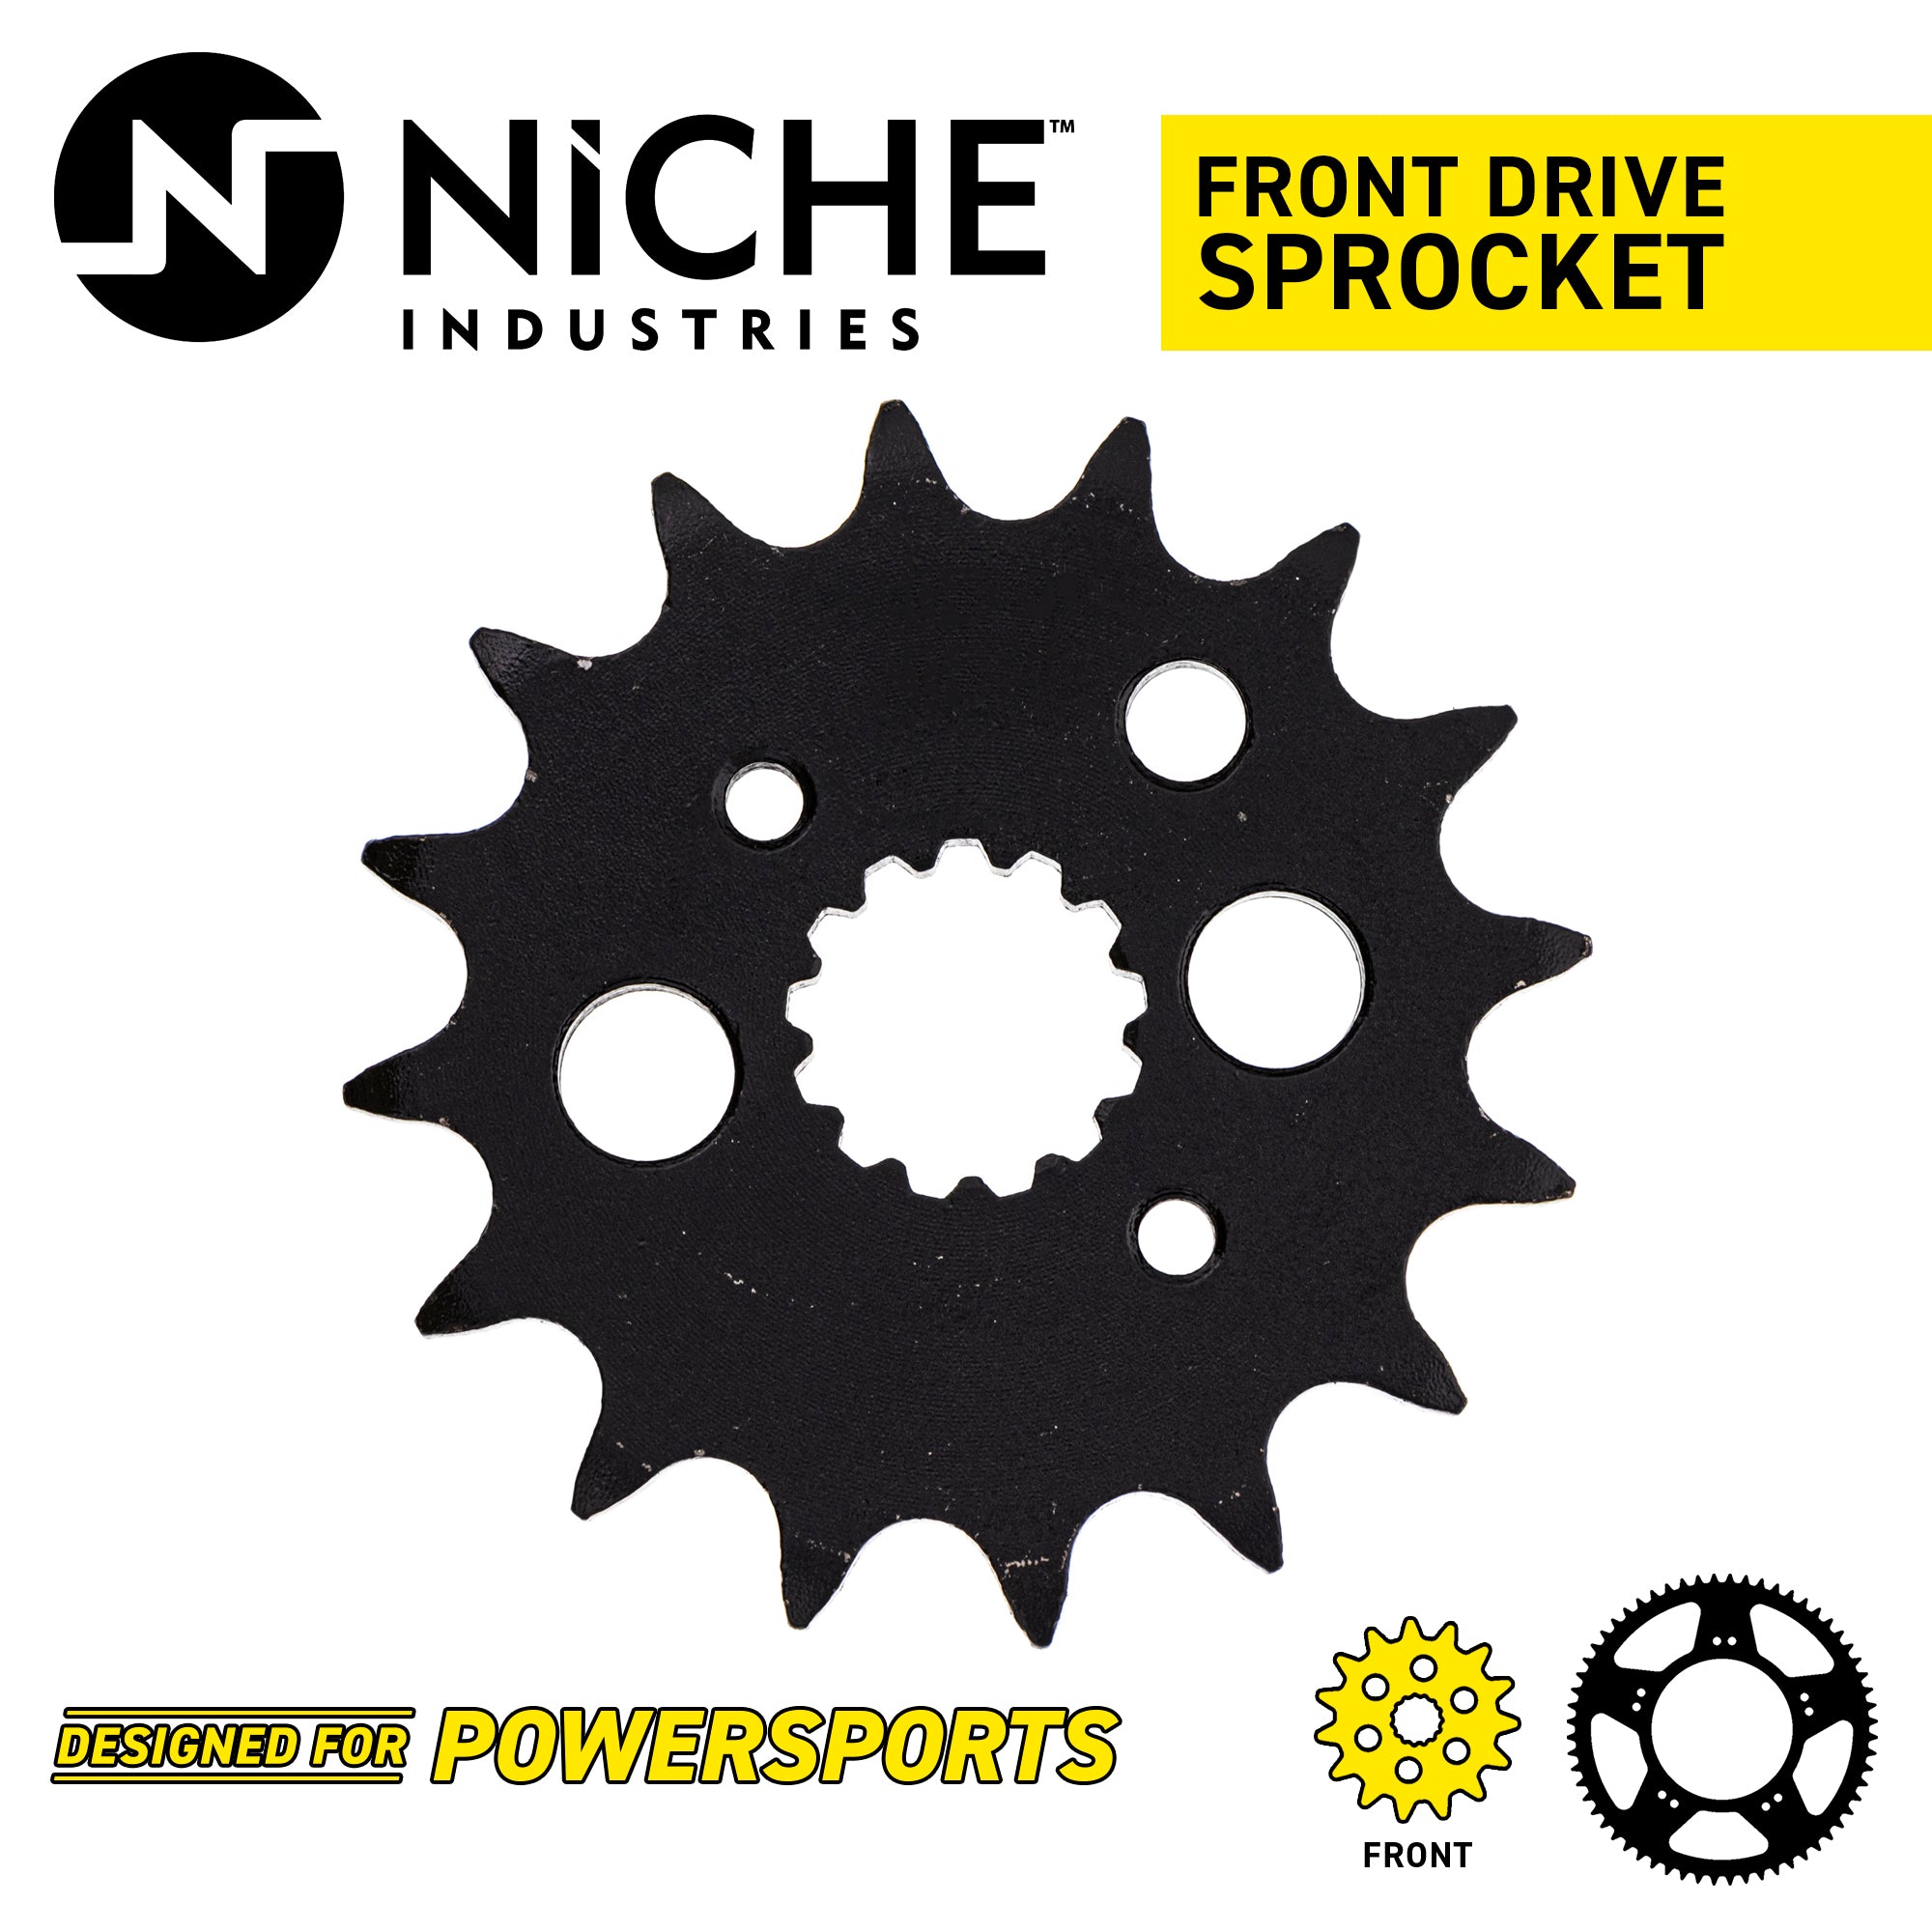 NICHE 519-CDS2364P Tooth Front Drive Sprocket for zOTHER Kawasaki JT